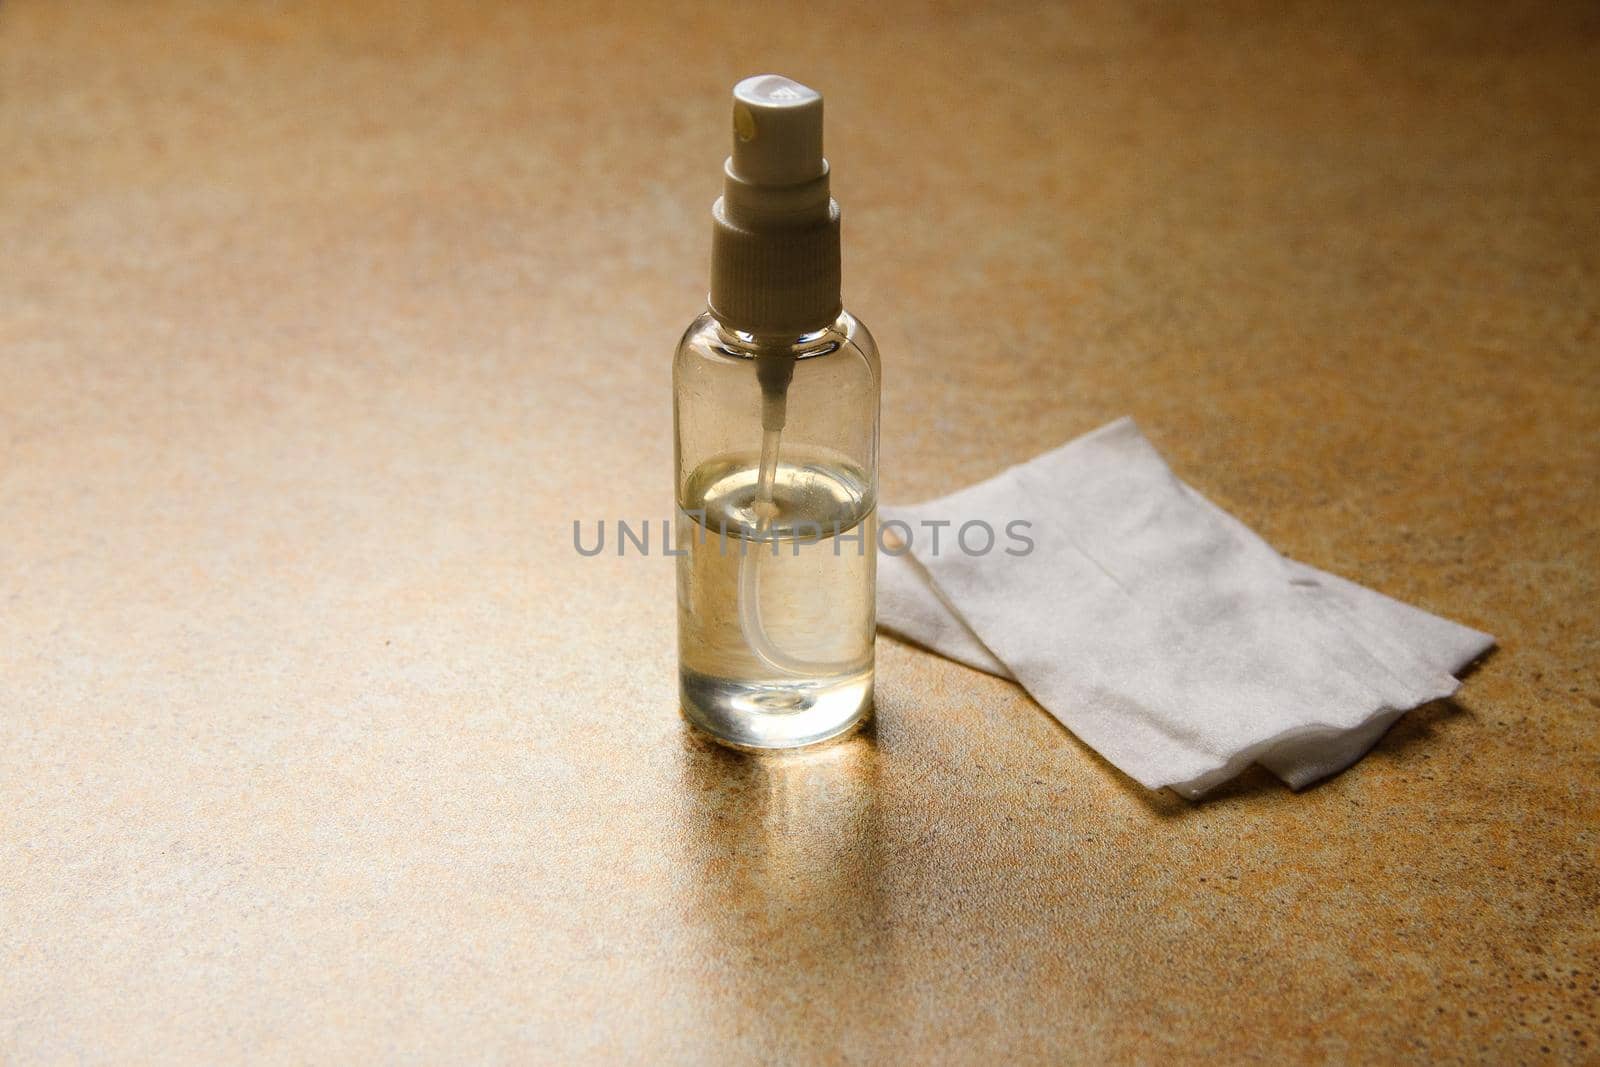 hand spray antiseptic for disinfection of hands from viruses and bacteria